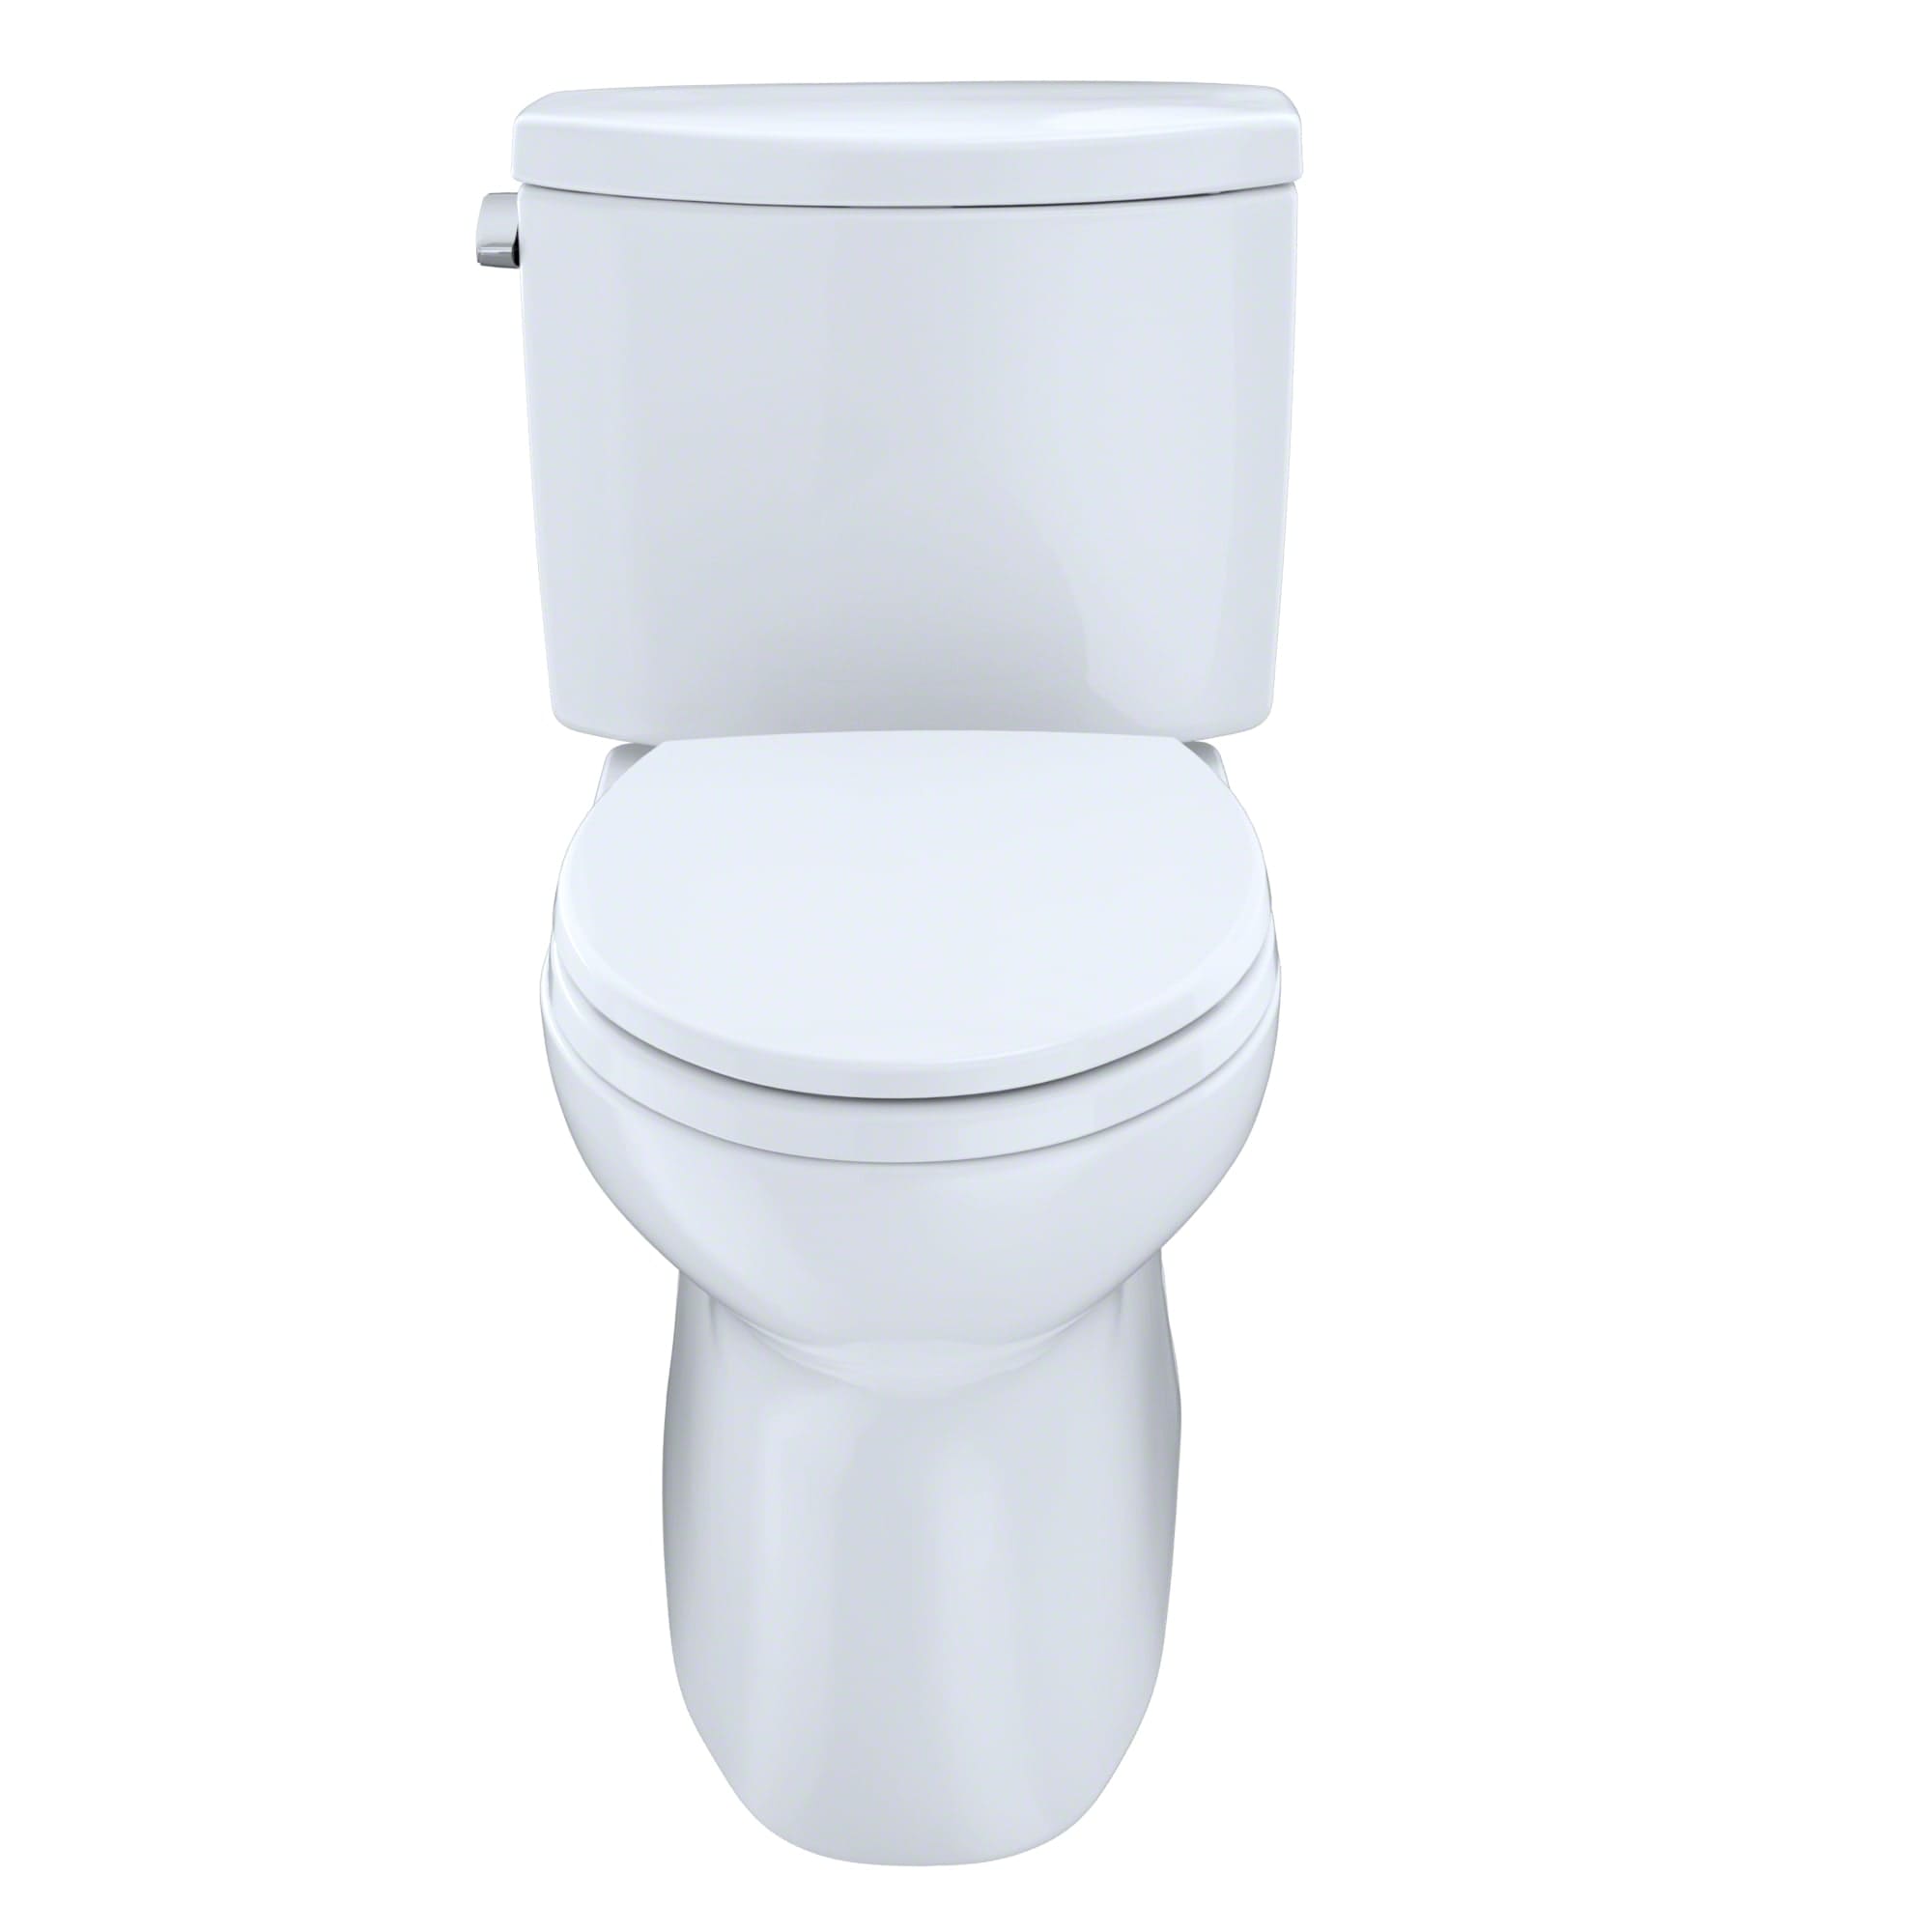 with SanaGloss and Right Hand Trip lever TOTO CST474CUFRG#01 1.0-GPF Vespin II 1G High-Efficiency Toilet Cotton 2 Piece 